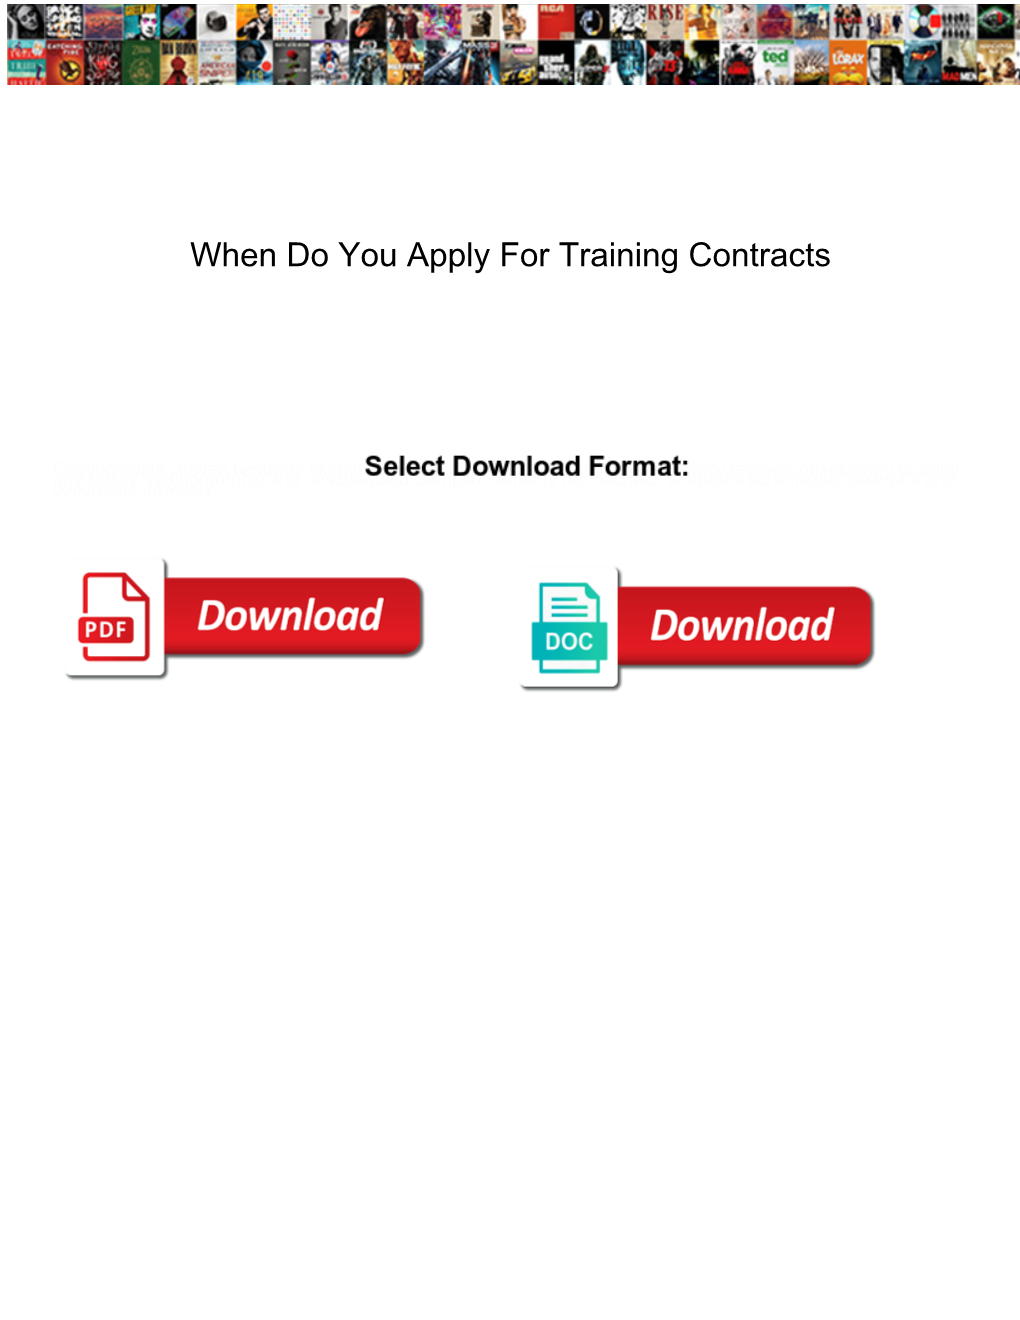 When Do You Apply for Training Contracts